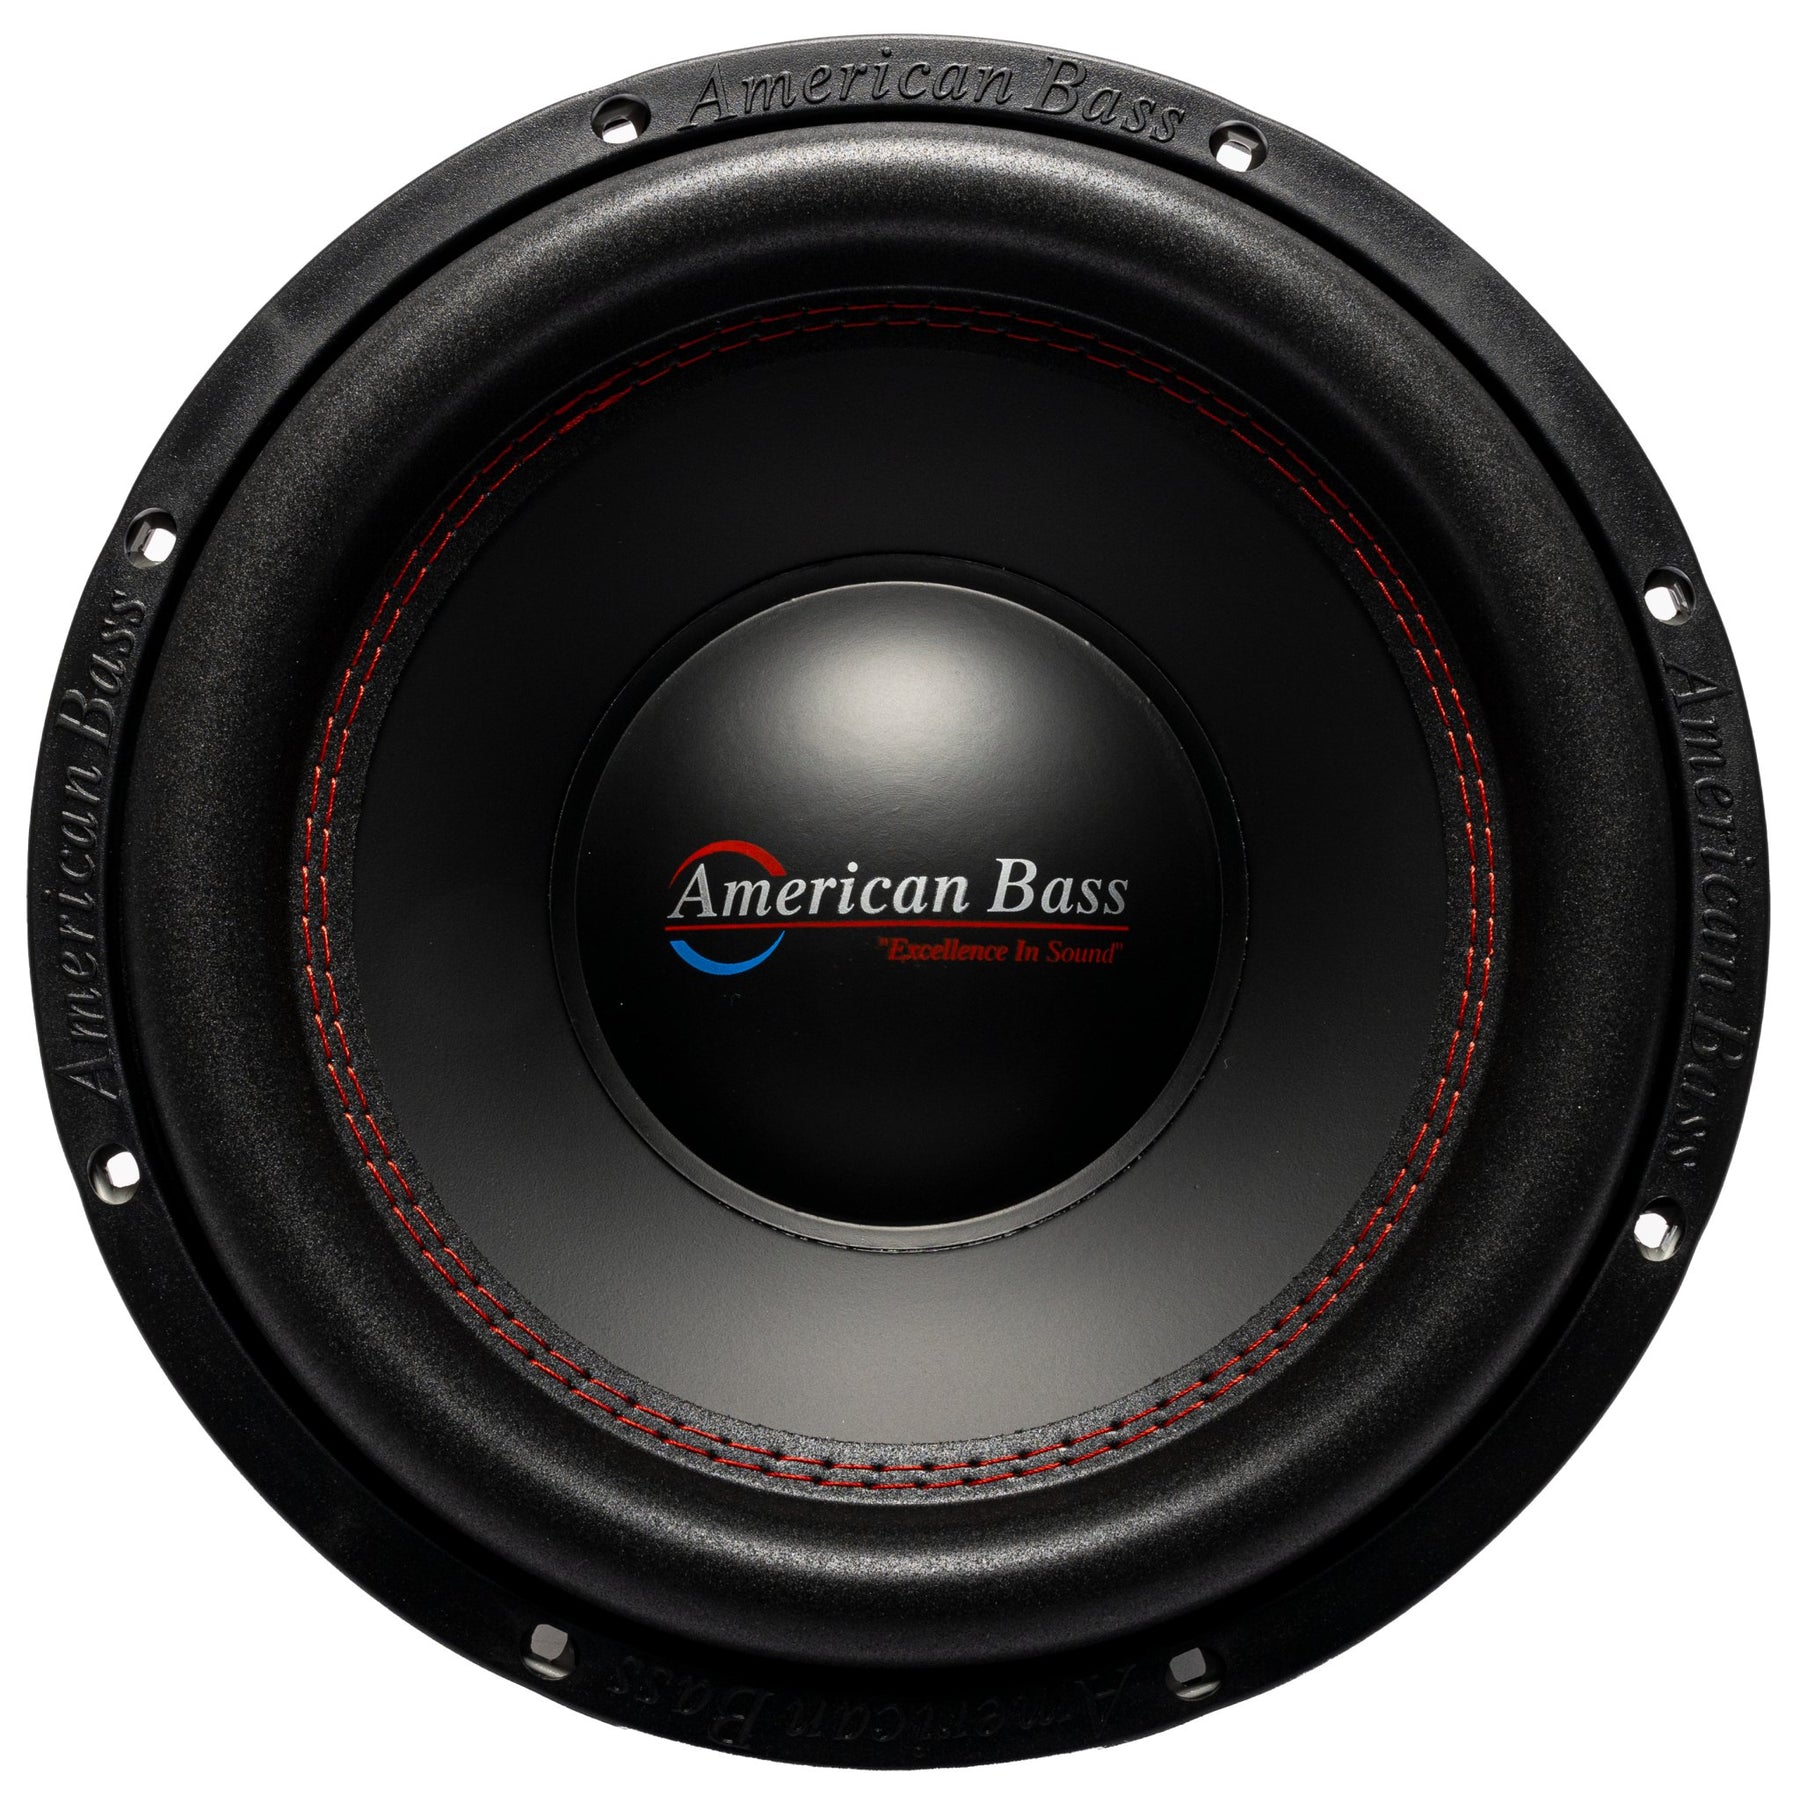 DX 10" Subwoofer - American Bass Audio